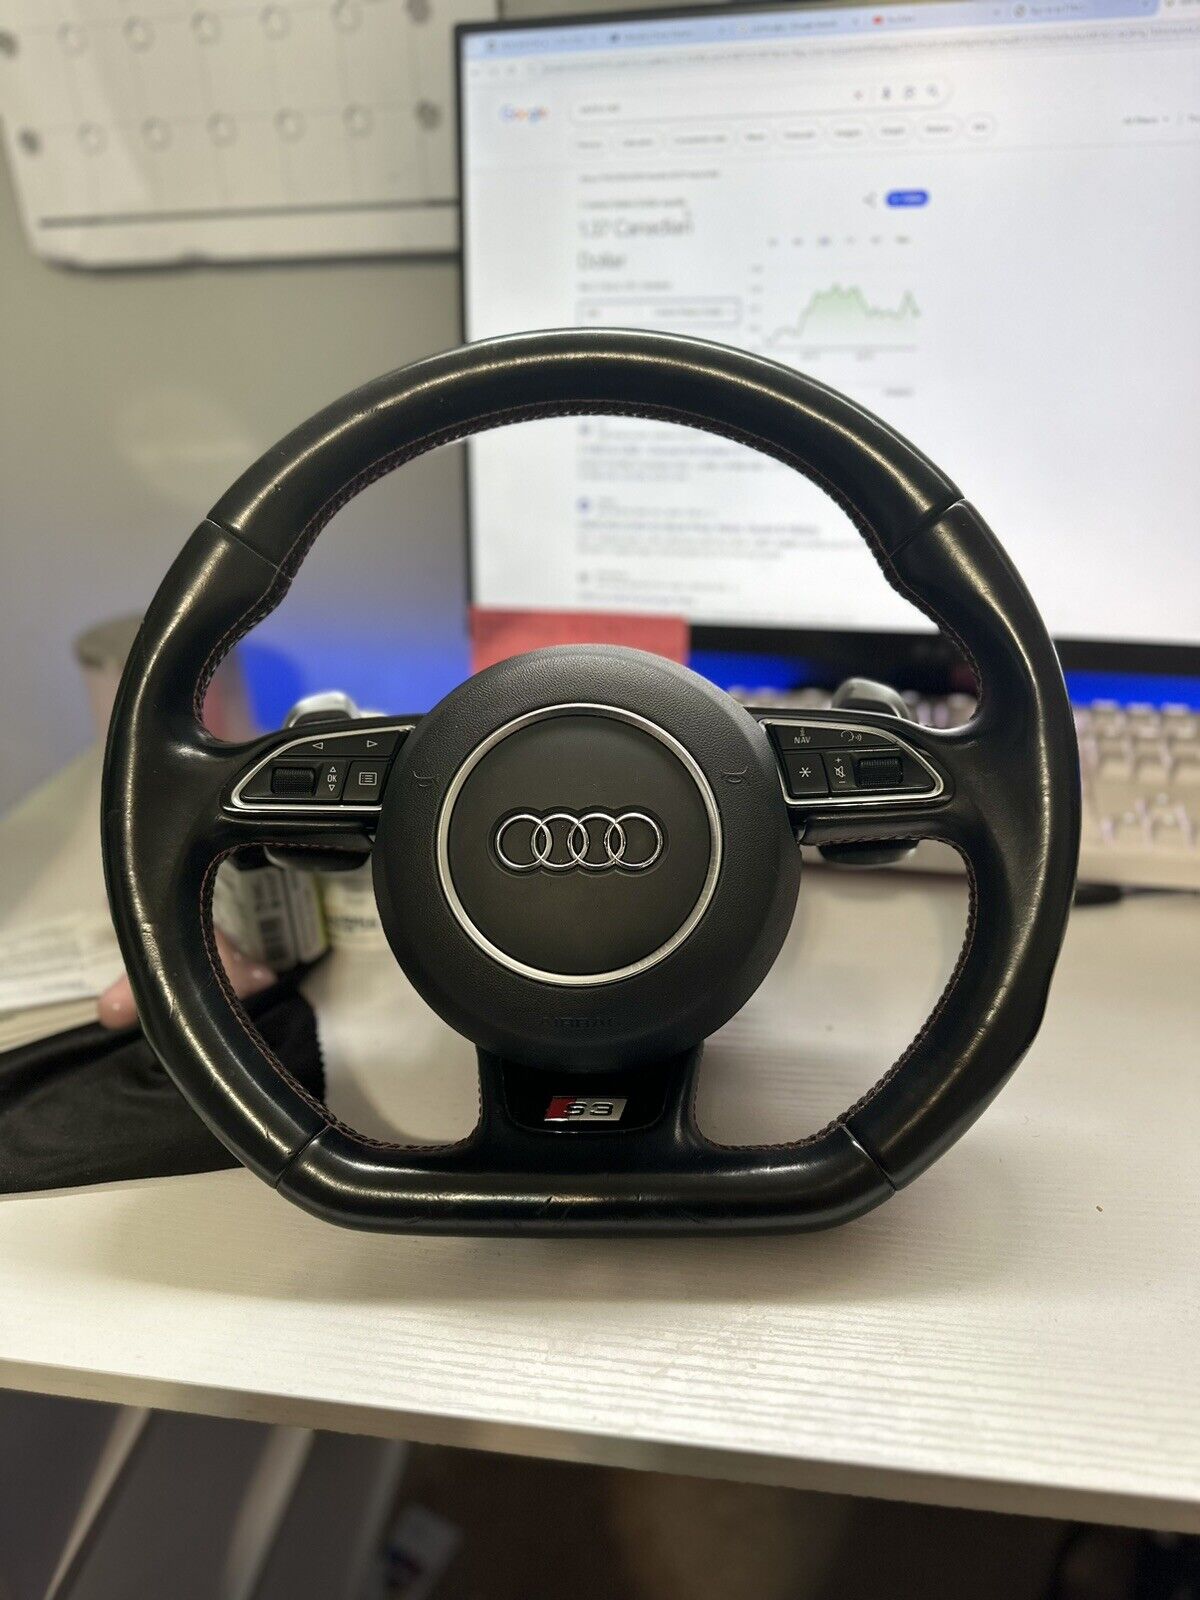 AUDI S3 2014 FLAT BOTTOM STEERING WHEEL WITH PADDLE SHIFTERS